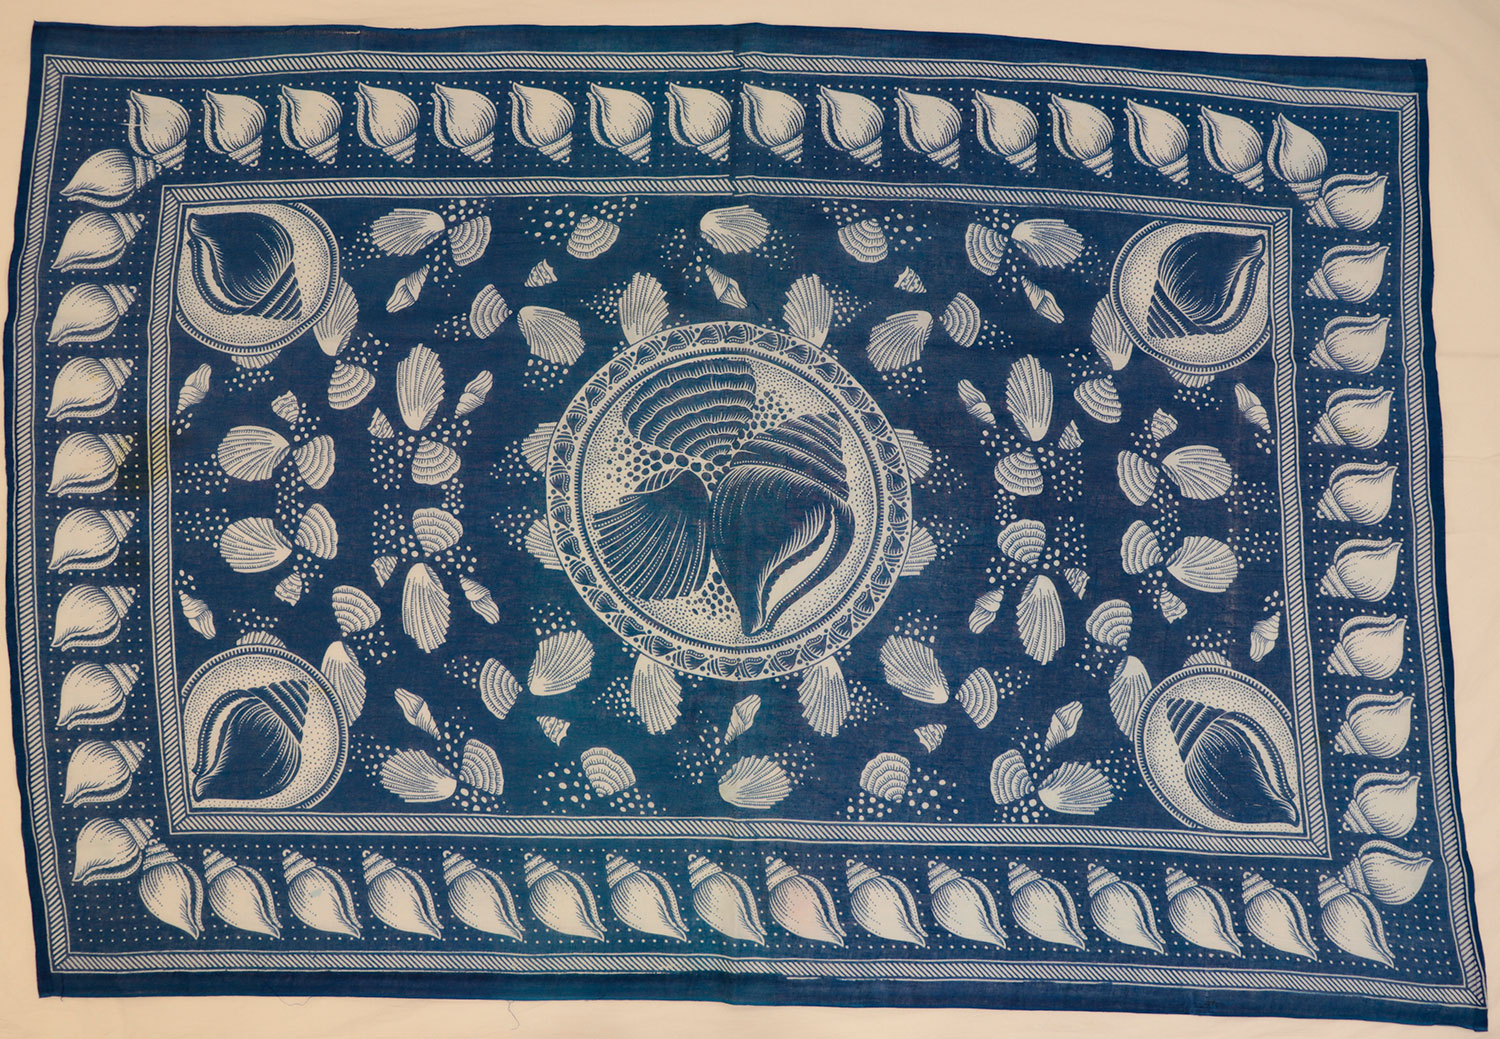 Capulana featuring a pattern of different white sea shells with a rectangular border of a shells: Africa, Southern Africa, Mozambique, 1994-2000.